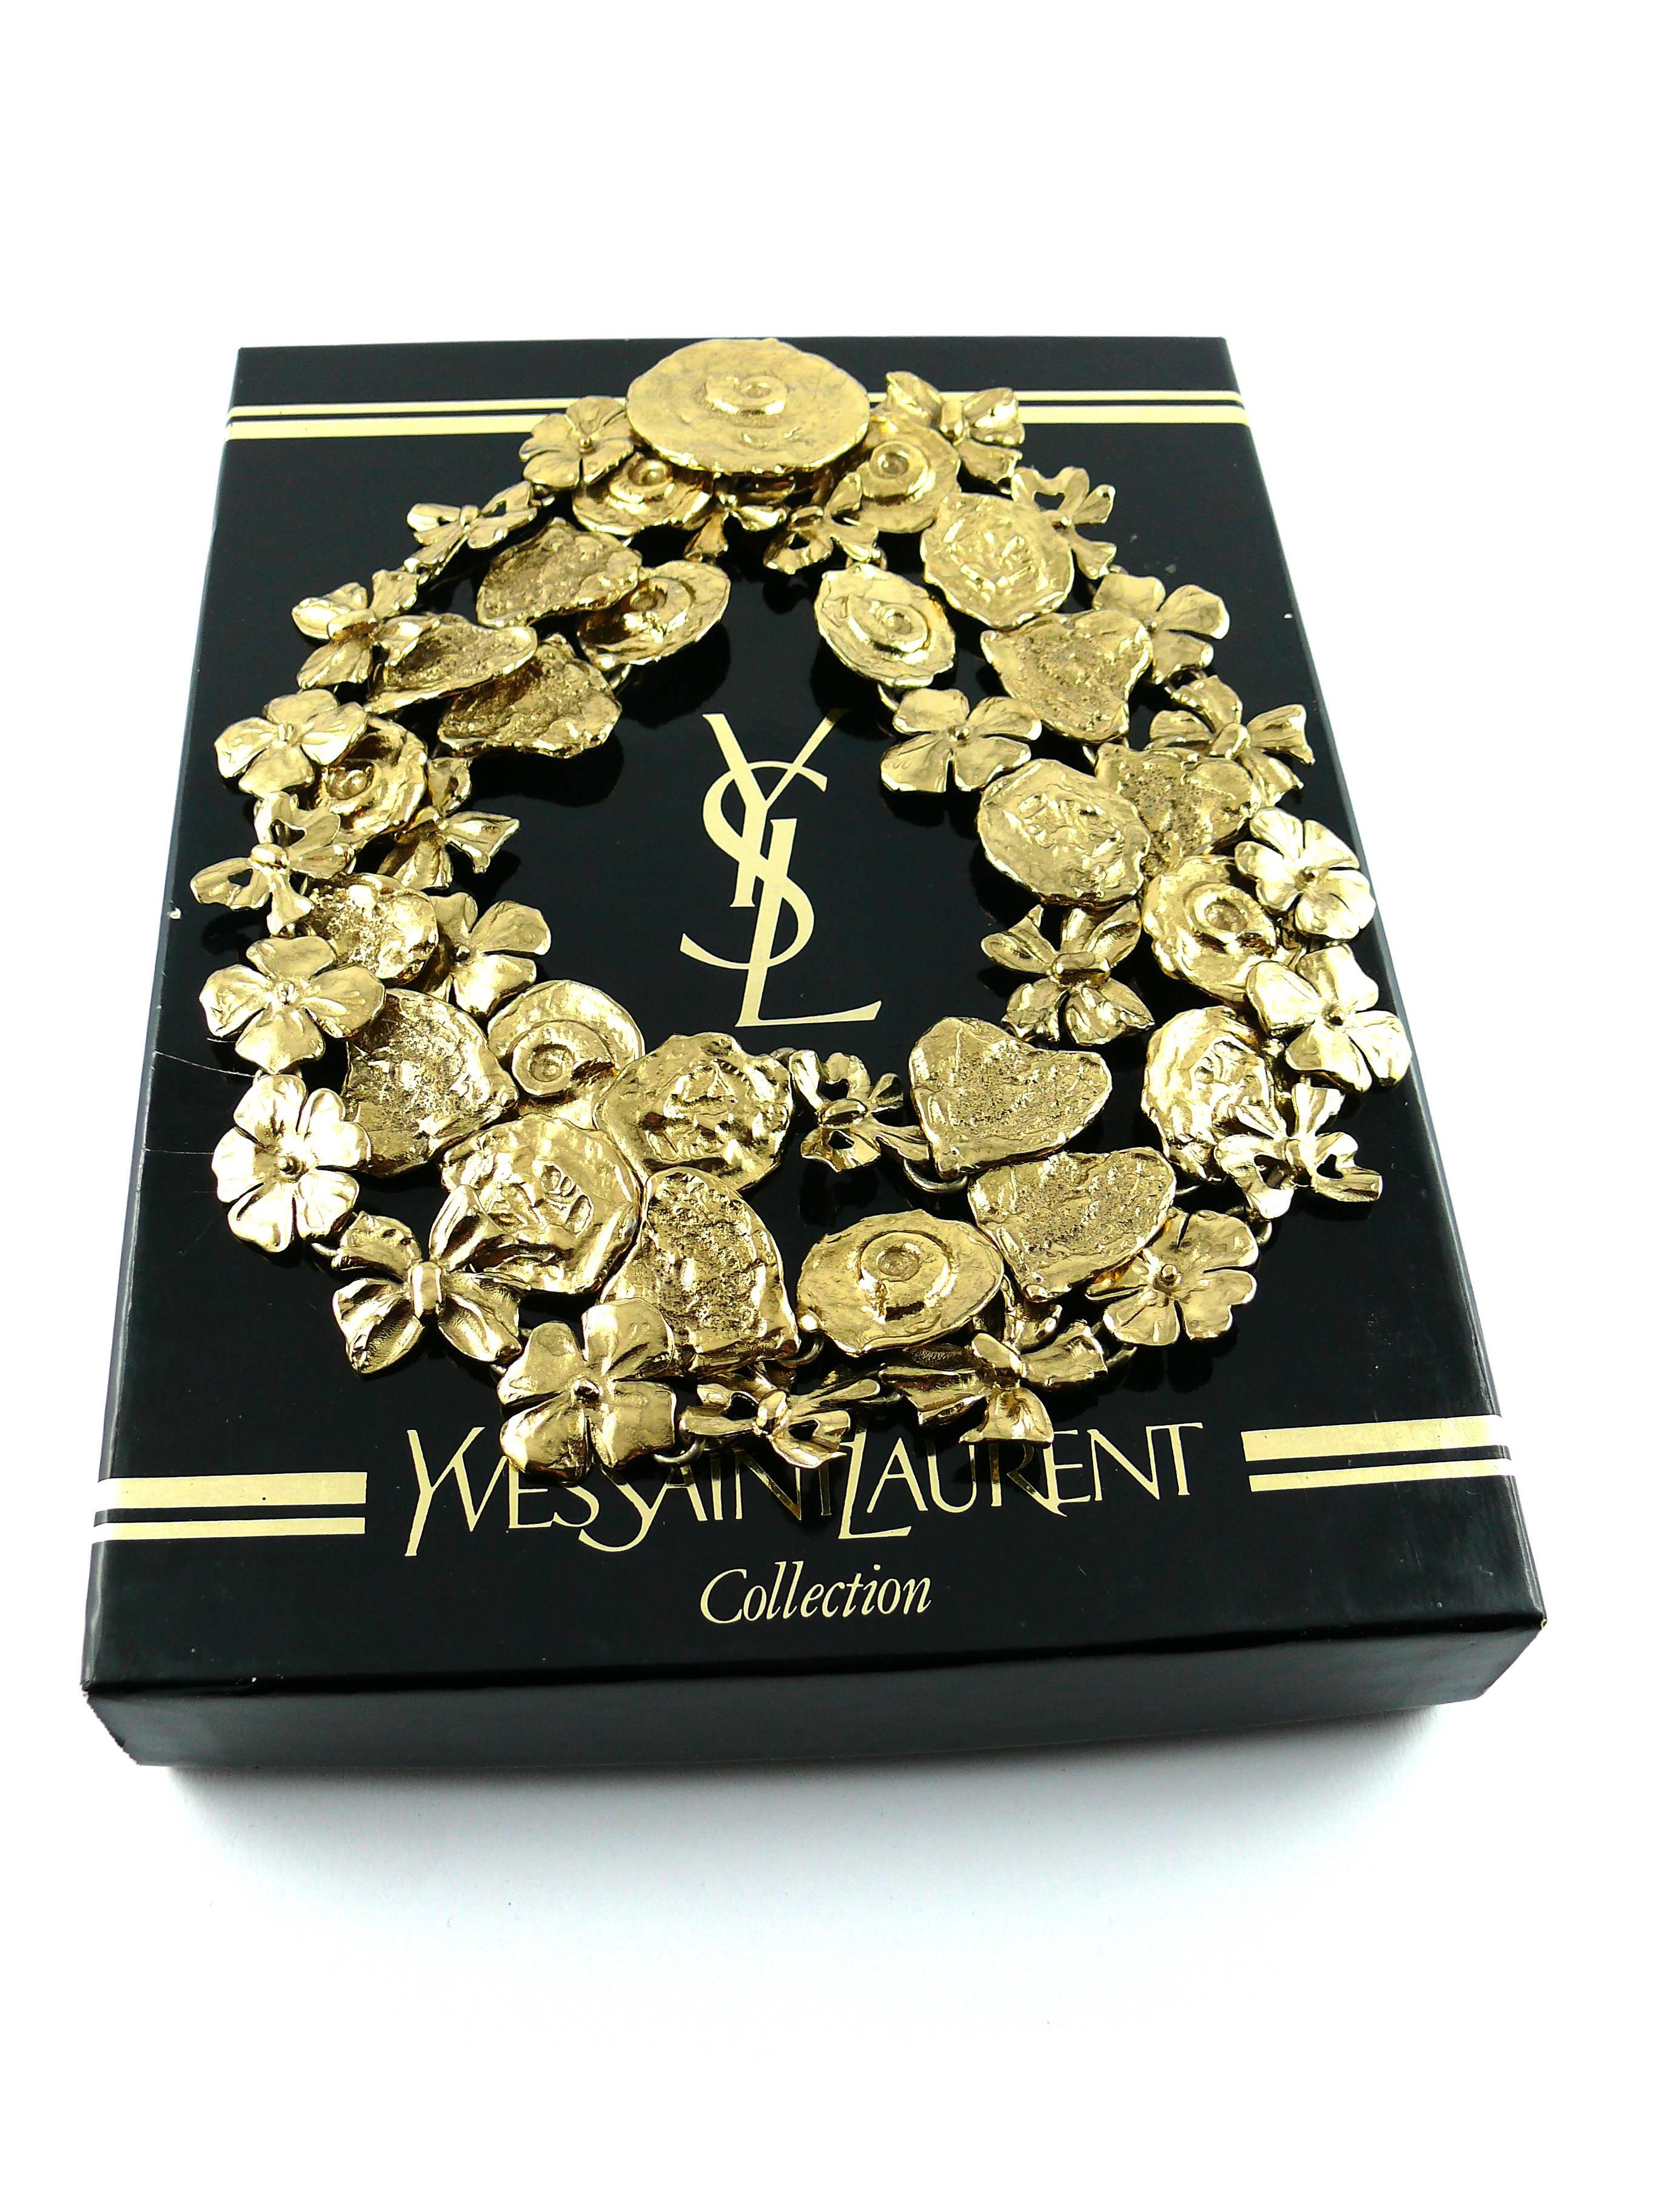 YVES SAINT LAURENT vintage rare opulent three-tier articulated necklace created by parurier ROBERT GOOSSENS.

Gold tone textured metal with antique patina featuring fossil coins, bows, stylized hearts and flowers.

Hidden hook closure.

Marked